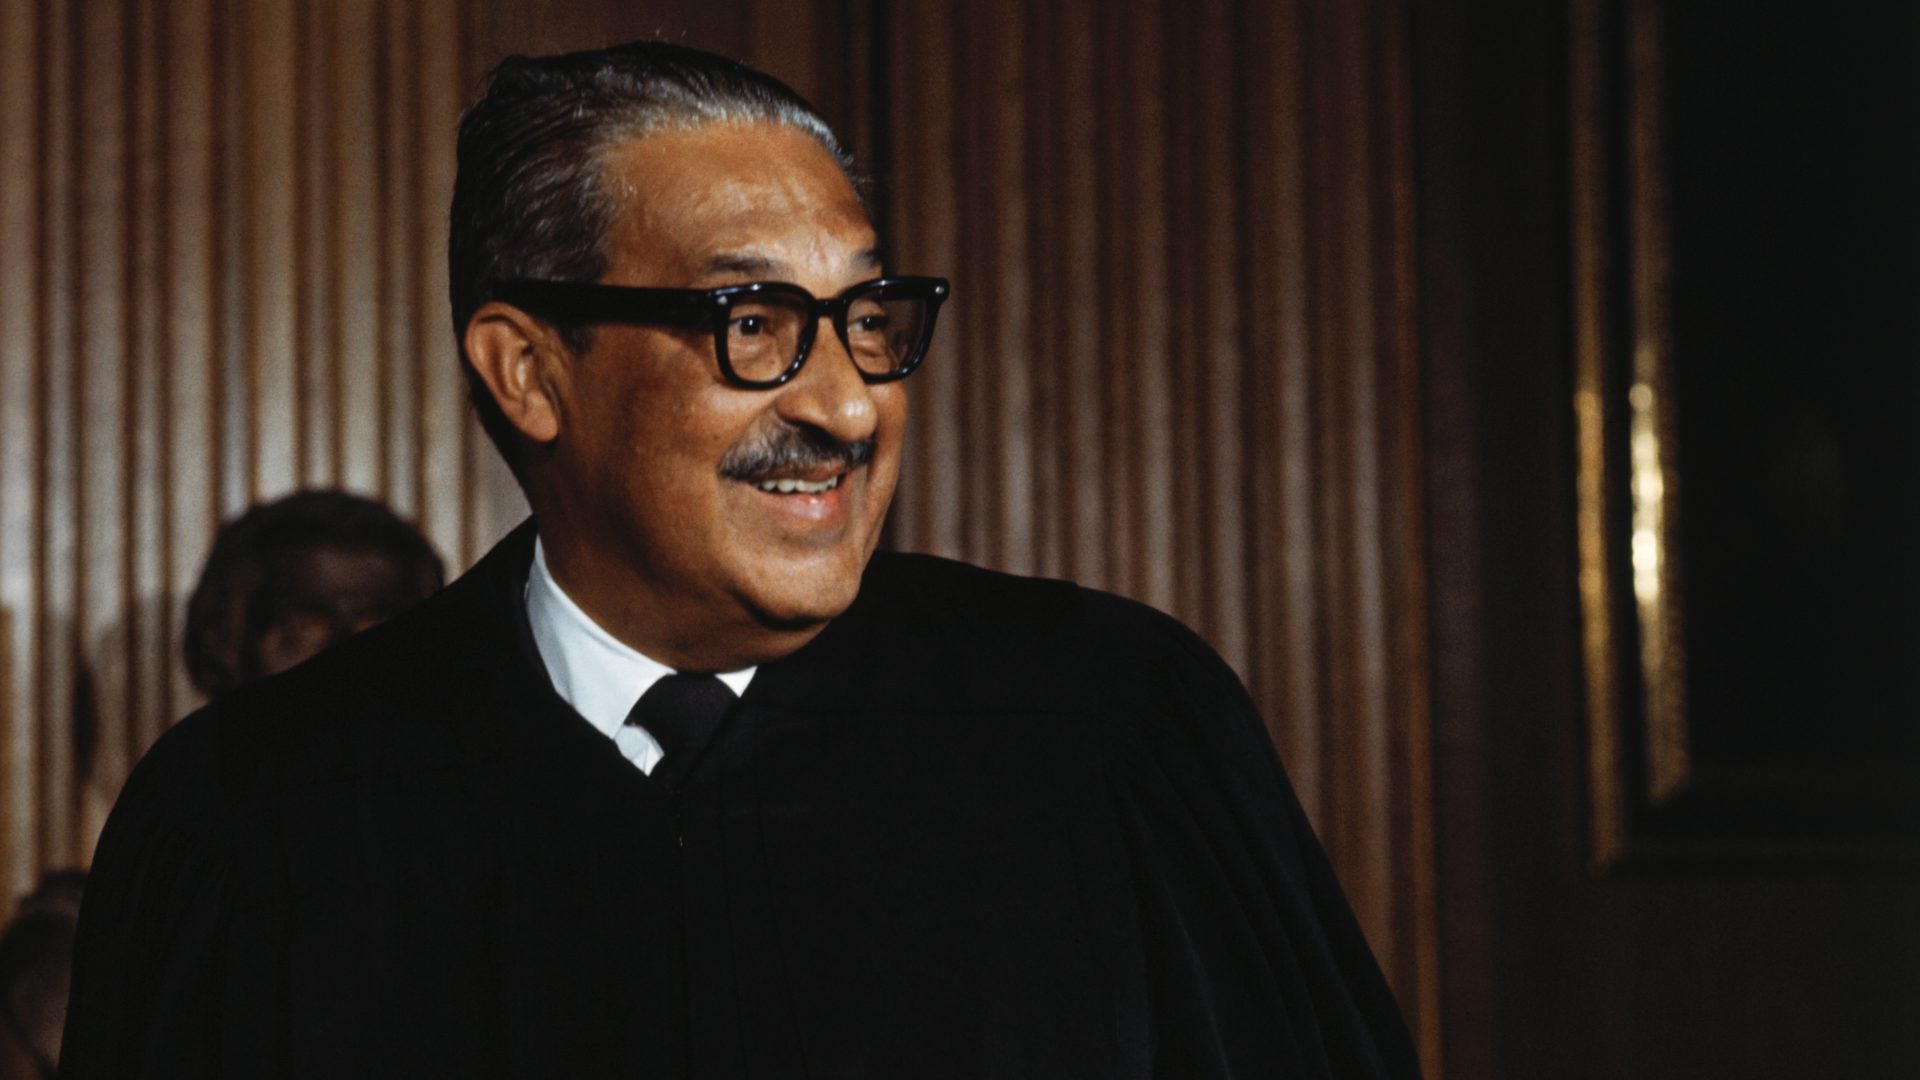 Statue Of Thurgood Marshall To Replace Bust Of Pro-Slavery Supreme Court Justice At The Capitol